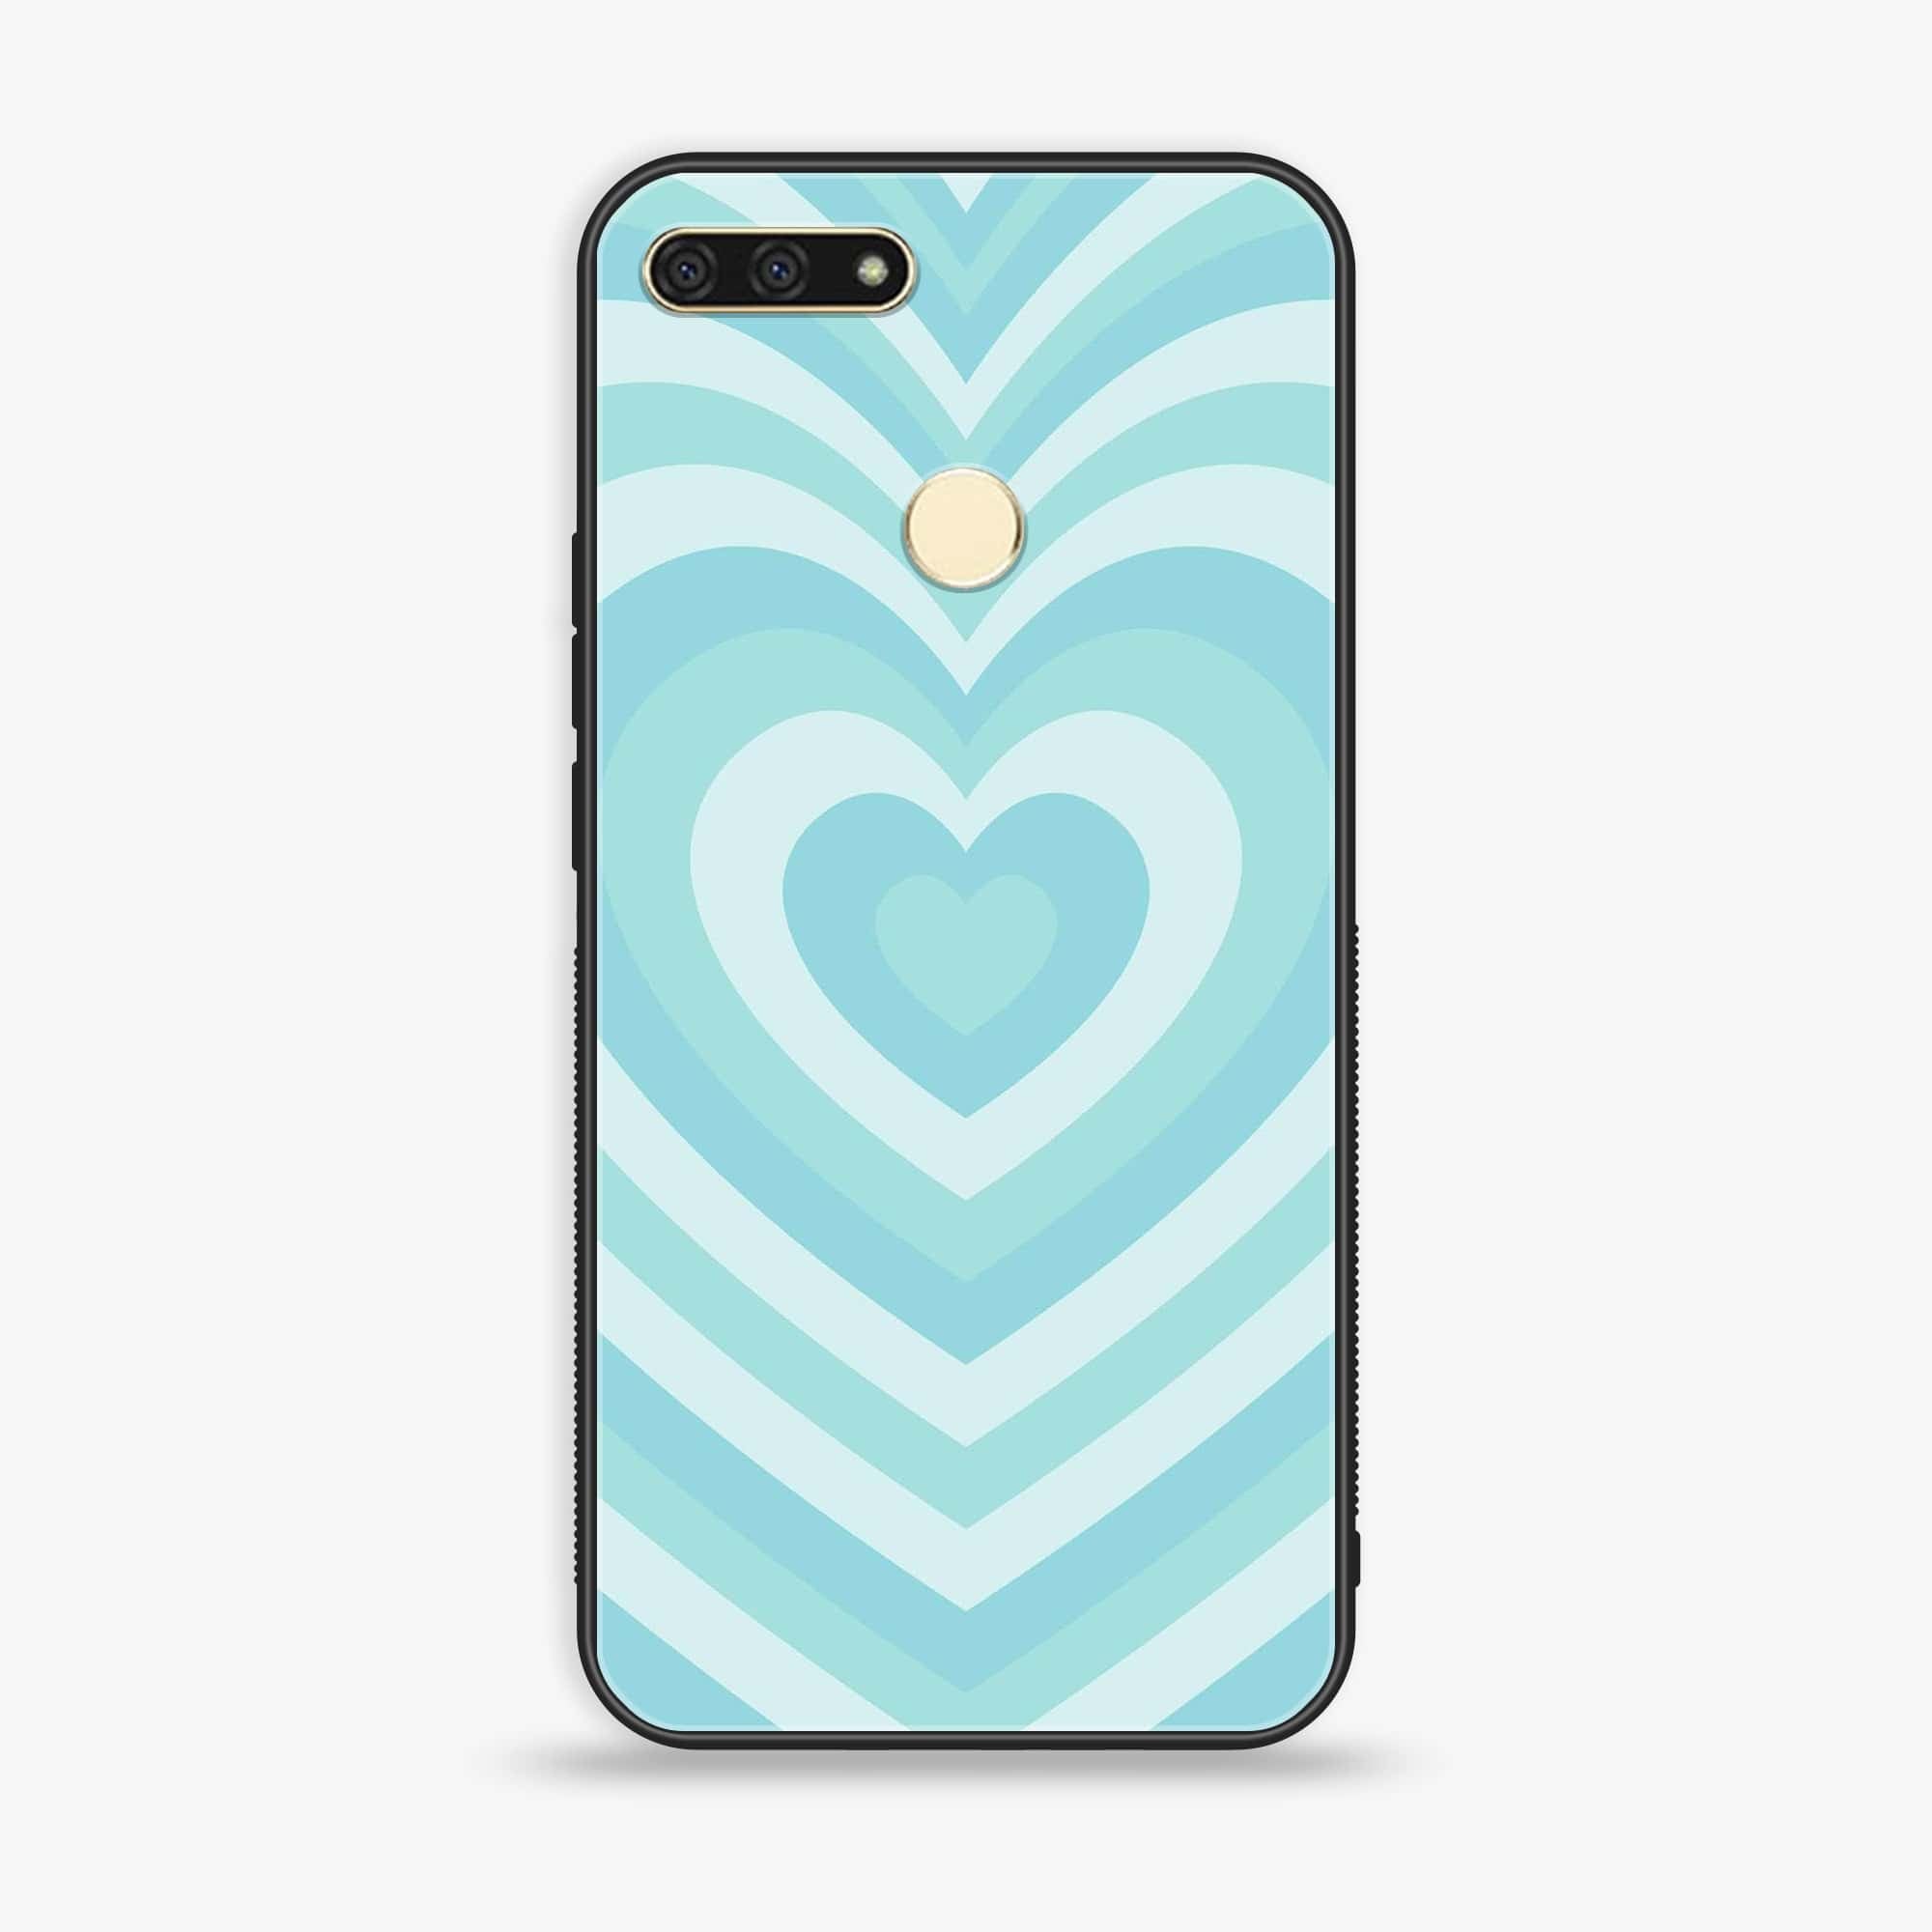 Huawei Y6 2018/Honor Play 7A - Heart Beat Series - Premium Printed Glass soft Bumper shock Proof Case